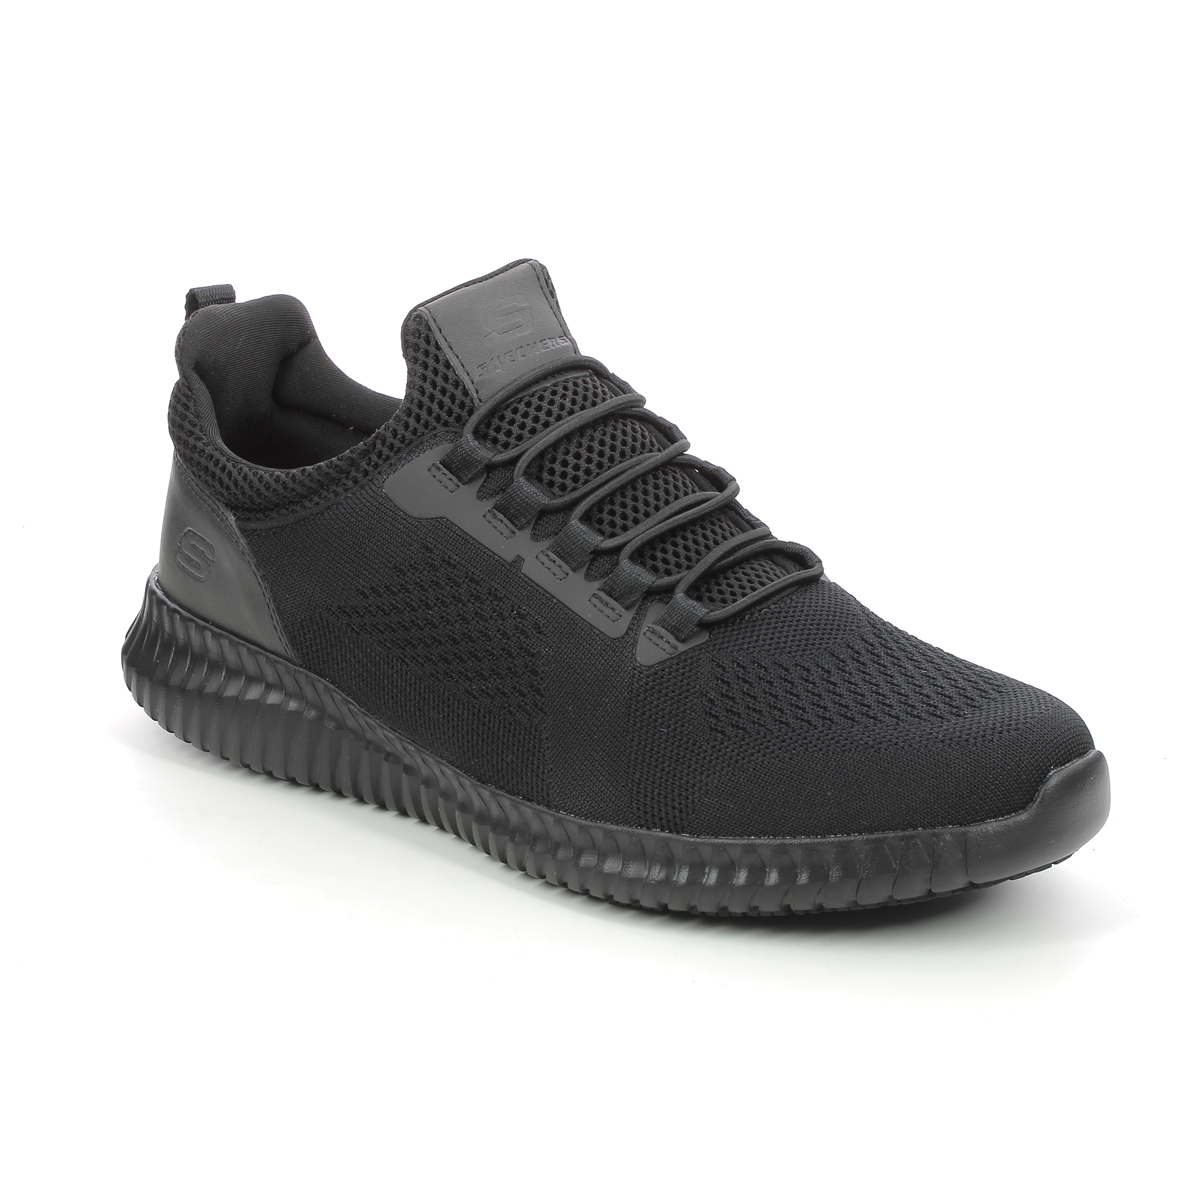 Skechers Work Trainer Cessnock Relaxed Black Mens Trainers 77188Ec In Size 9.5 In Plain Black